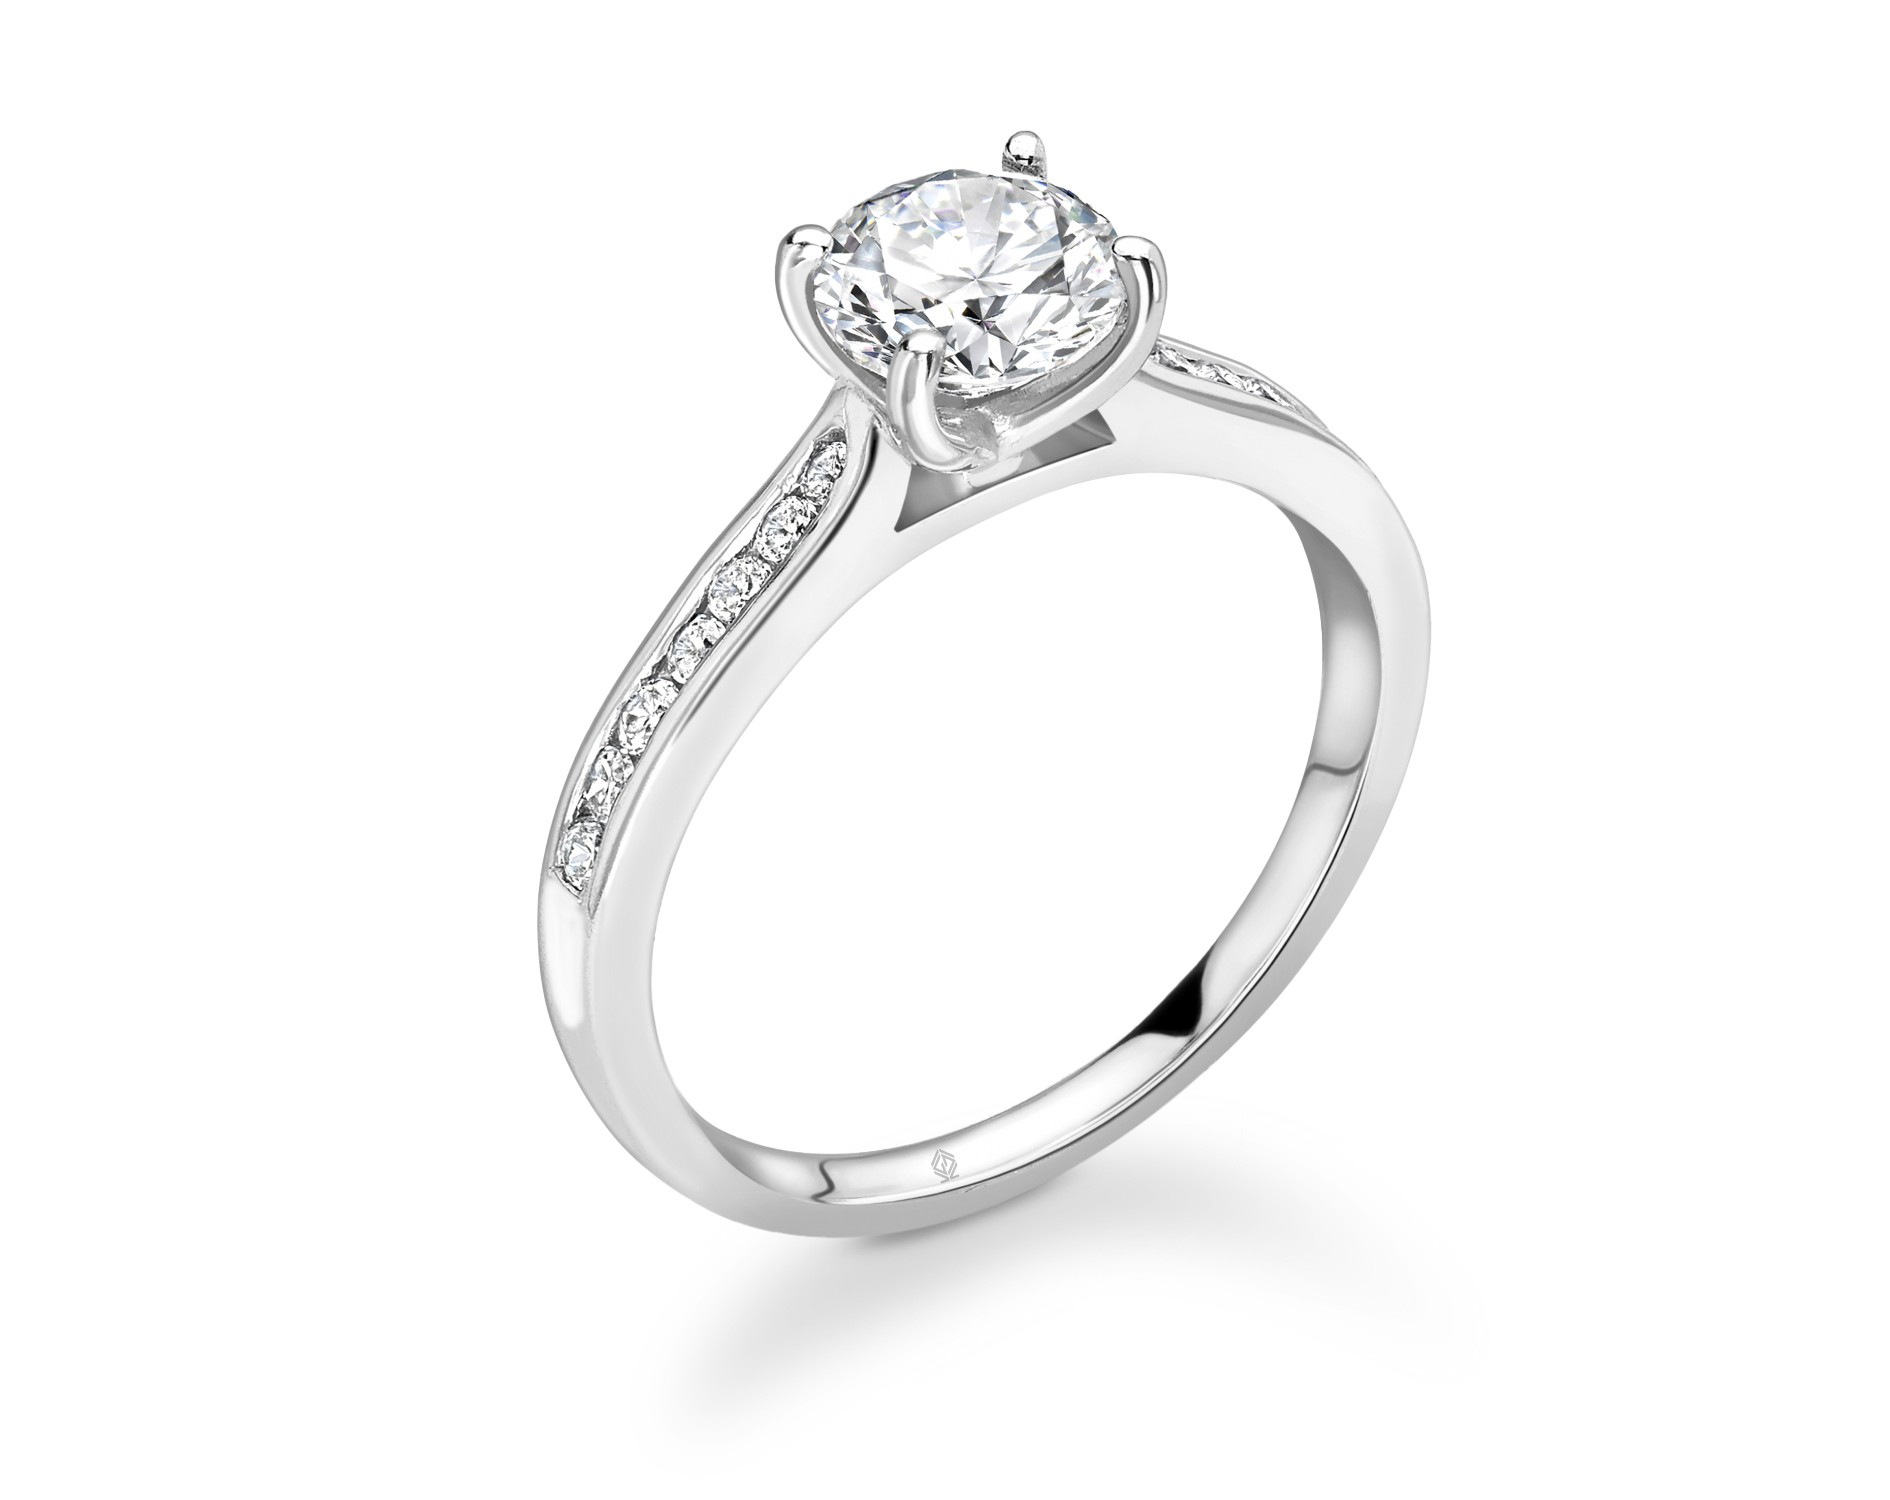 18K WHITE GOLD 4 PRONGS ROUND CUT DIAMOND ENGAGEMENT RING WITH SIDE STONES CHANNEL SET